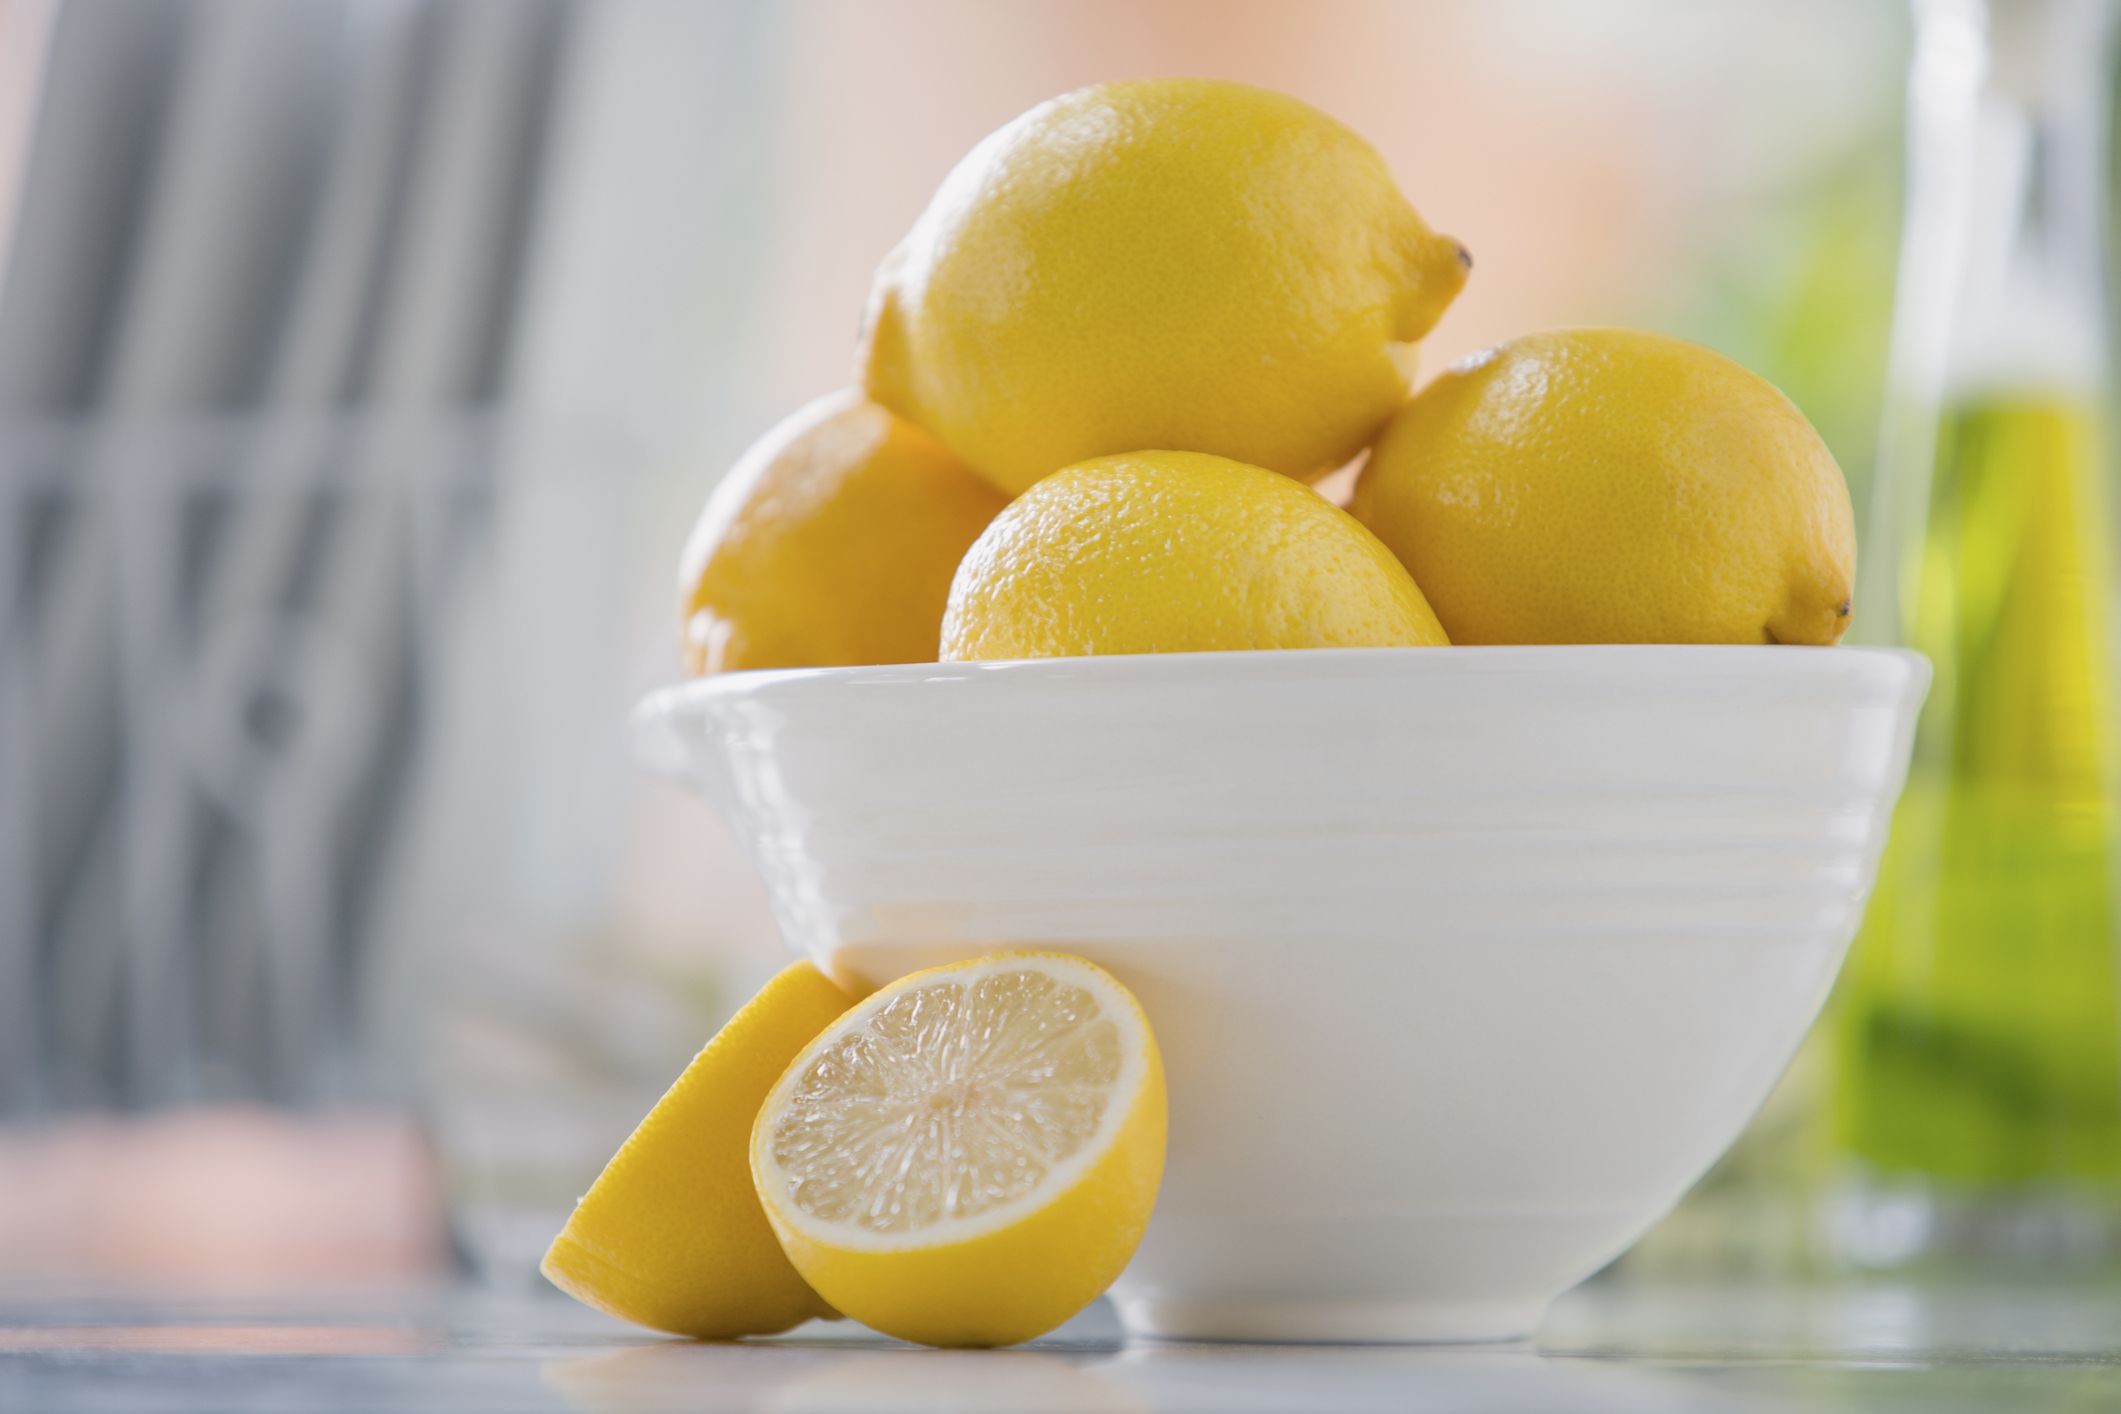 All About Lemons and How to Use Them